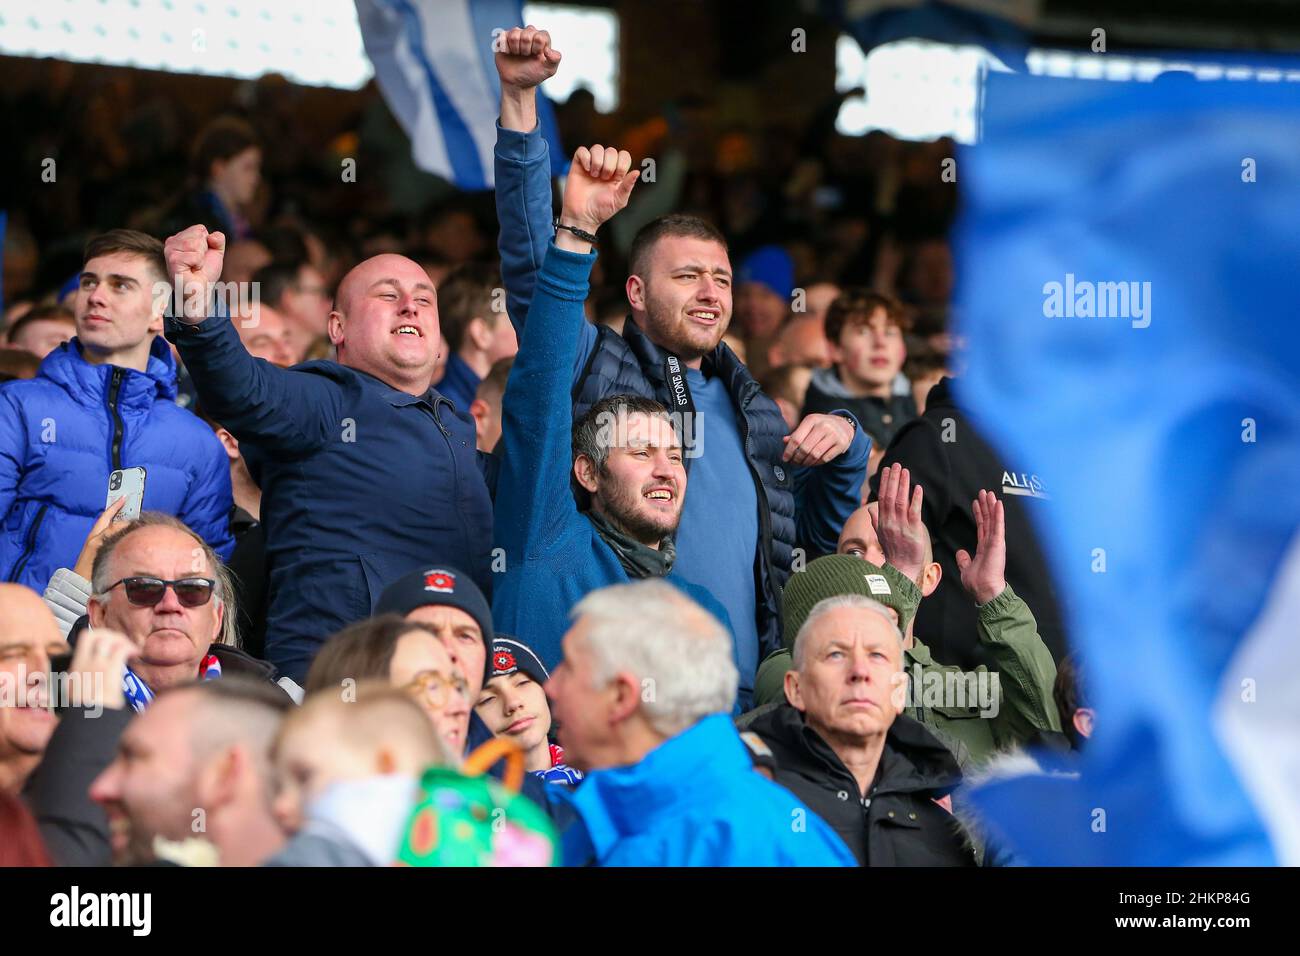 These are some of the brilliant Hartlepool United fans who headed